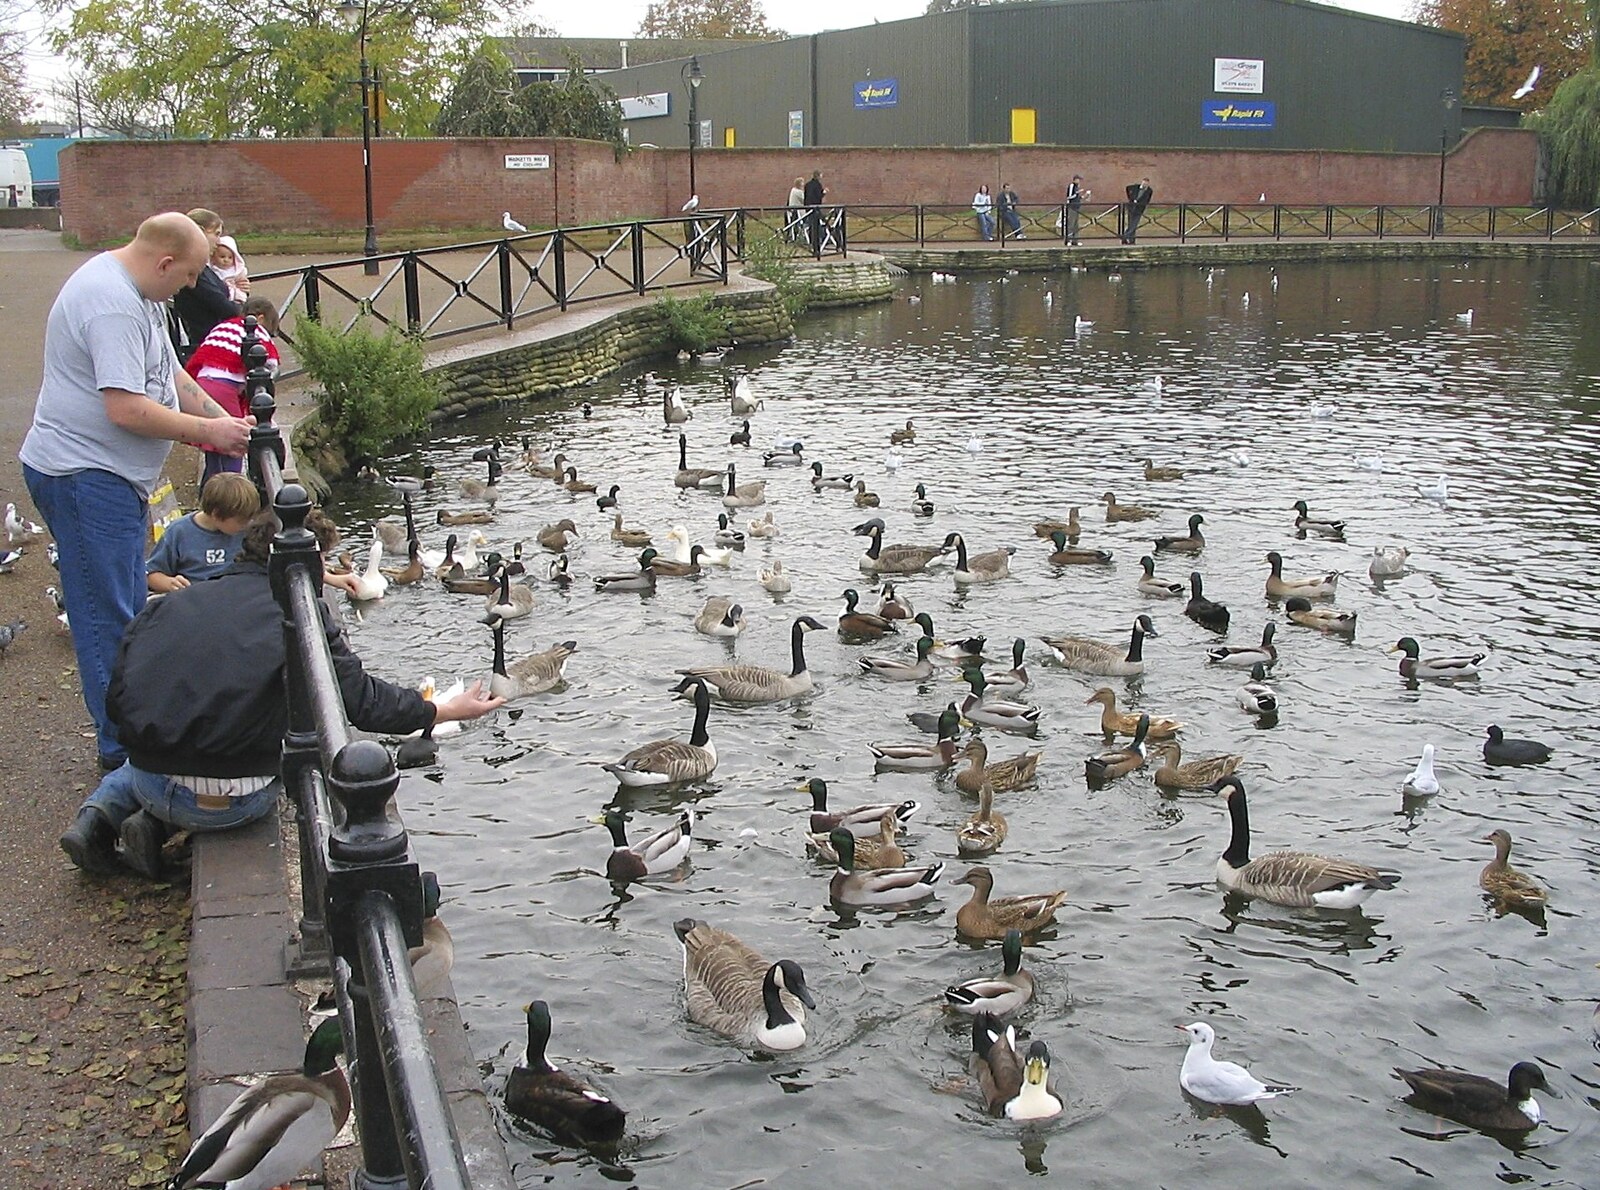 There's a mass of geese and ducks by Mere's Mouth from Feeding the Ducks: a Diss and Norwich Miscellany - 7th November 2004